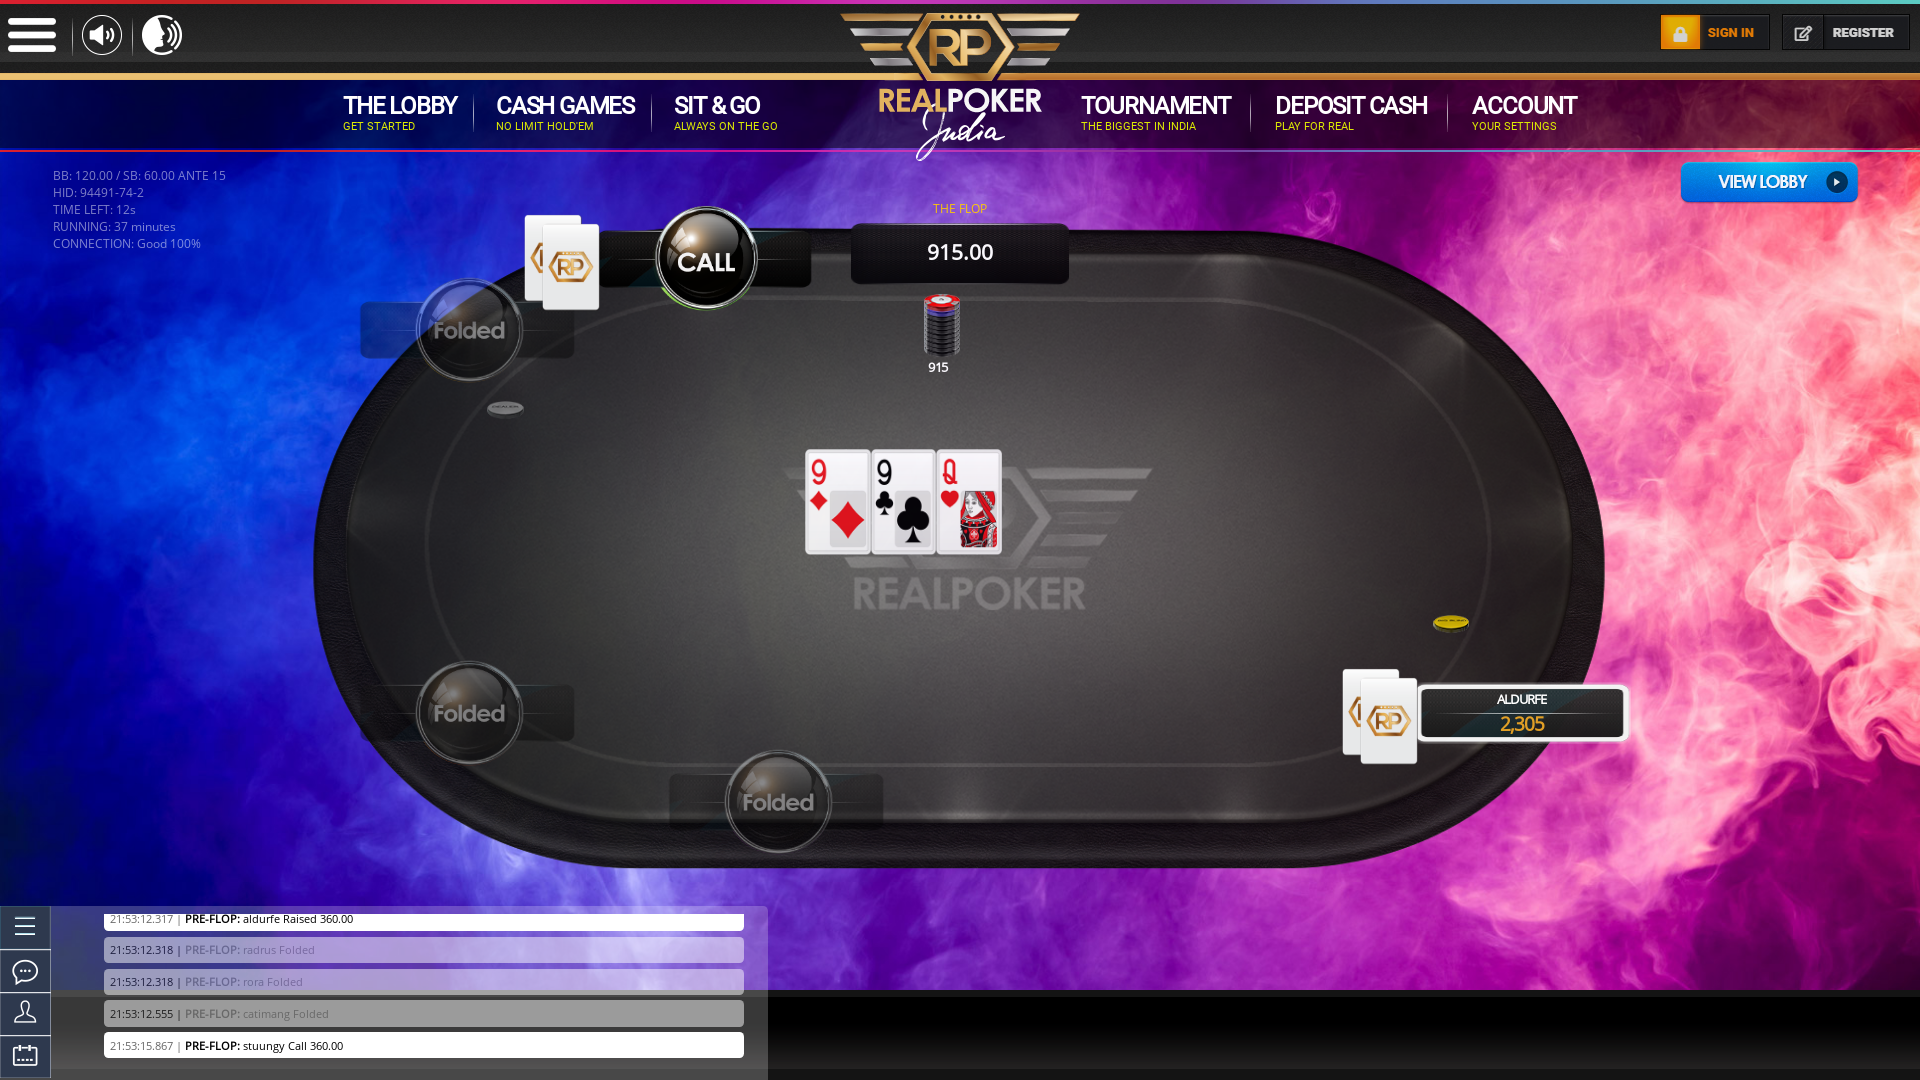 Real poker 10 player table in the 37th minute